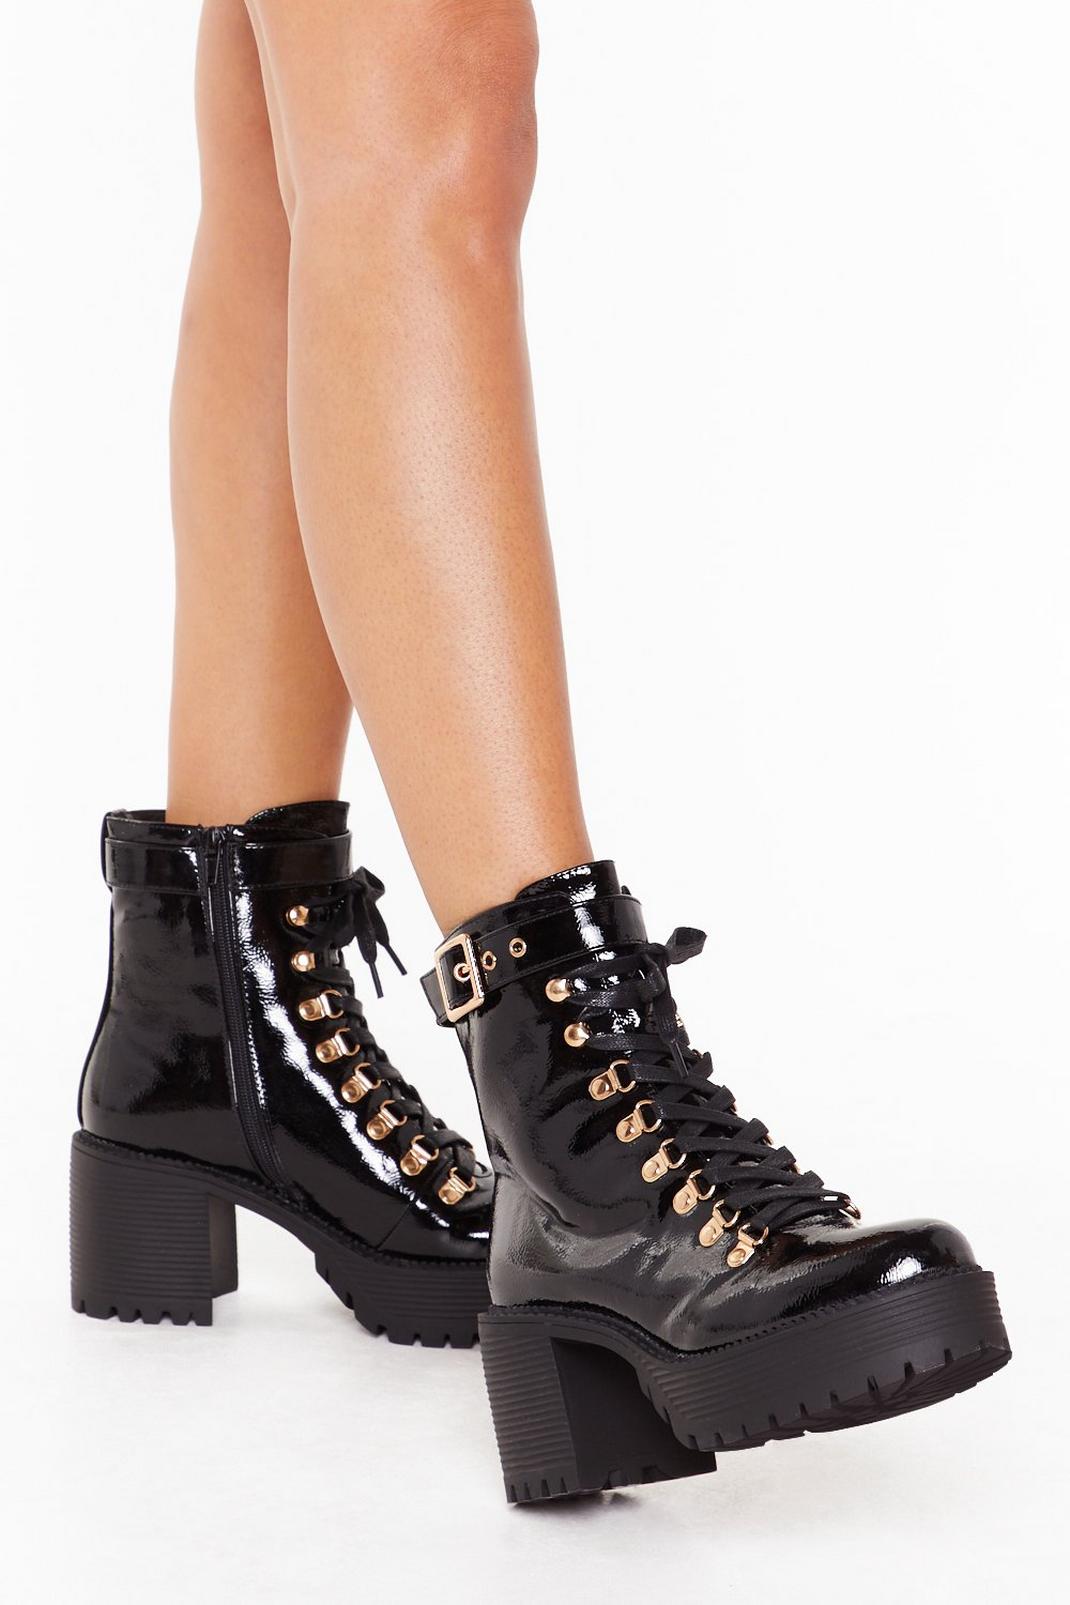 Shake Your Booty Patent Faux Leather Lace-Up Boots image number 1